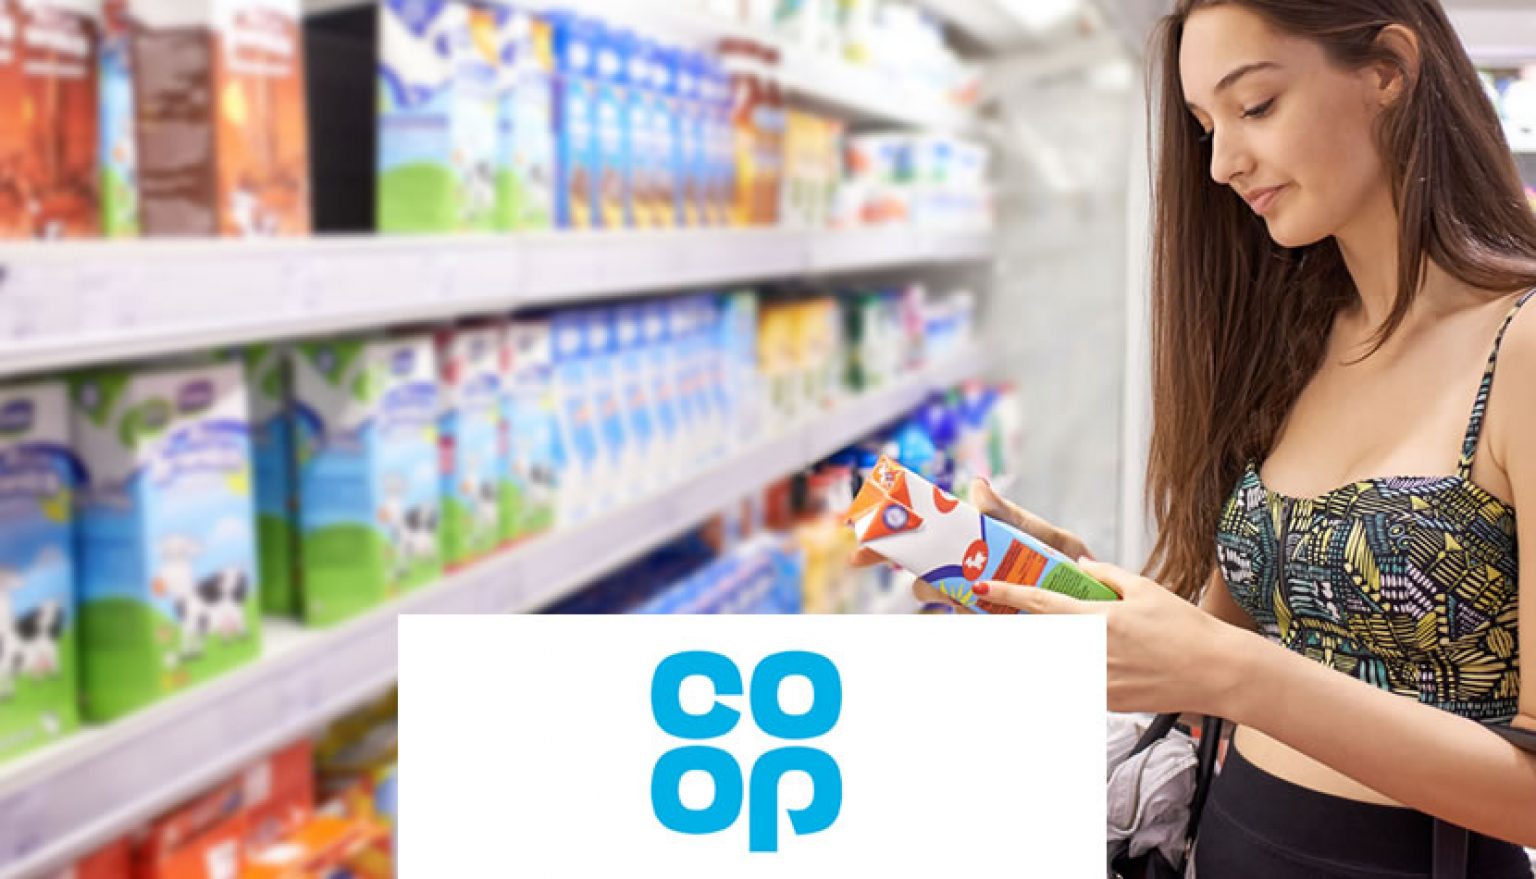 co-op-nhs-discount-nhs-10-offer-in-store